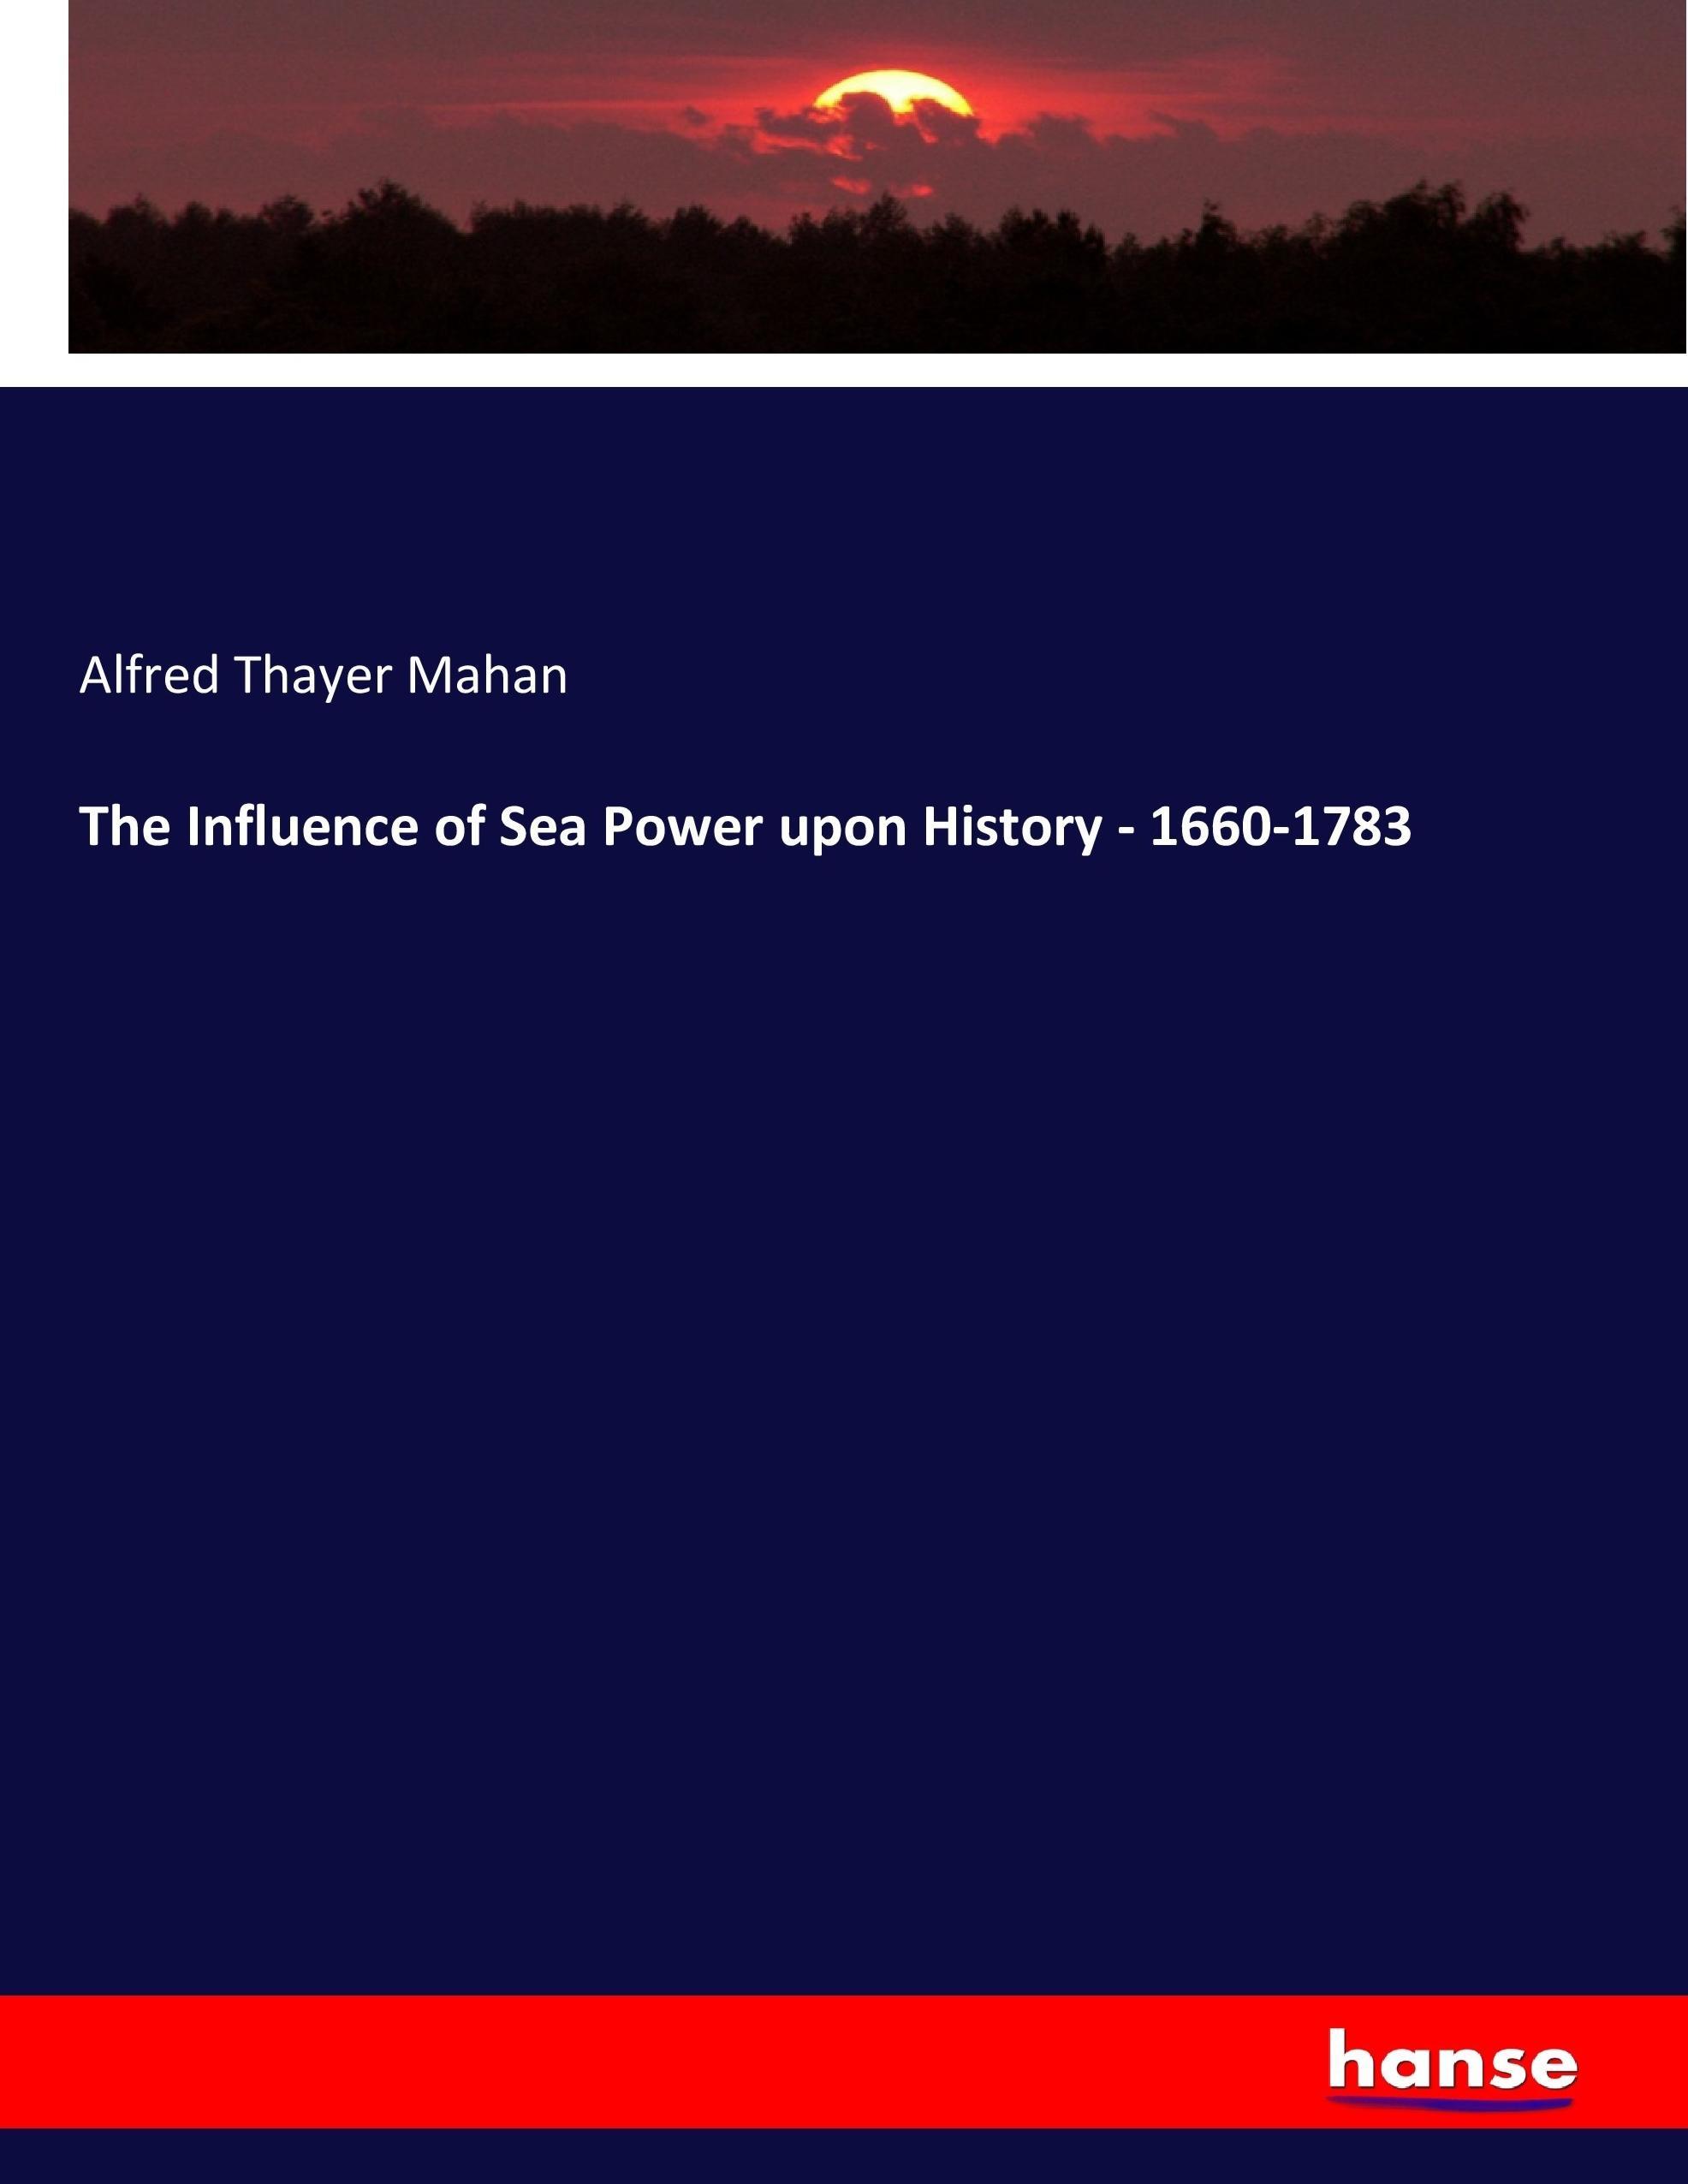 The Influence of Sea Power upon History - 1660-1783 | Alfred Thayer Mahan | Taschenbuch | Paperback | 636 S. | Englisch | 2017 | hansebooks | EAN 9783337033668 - Mahan, Alfred Thayer